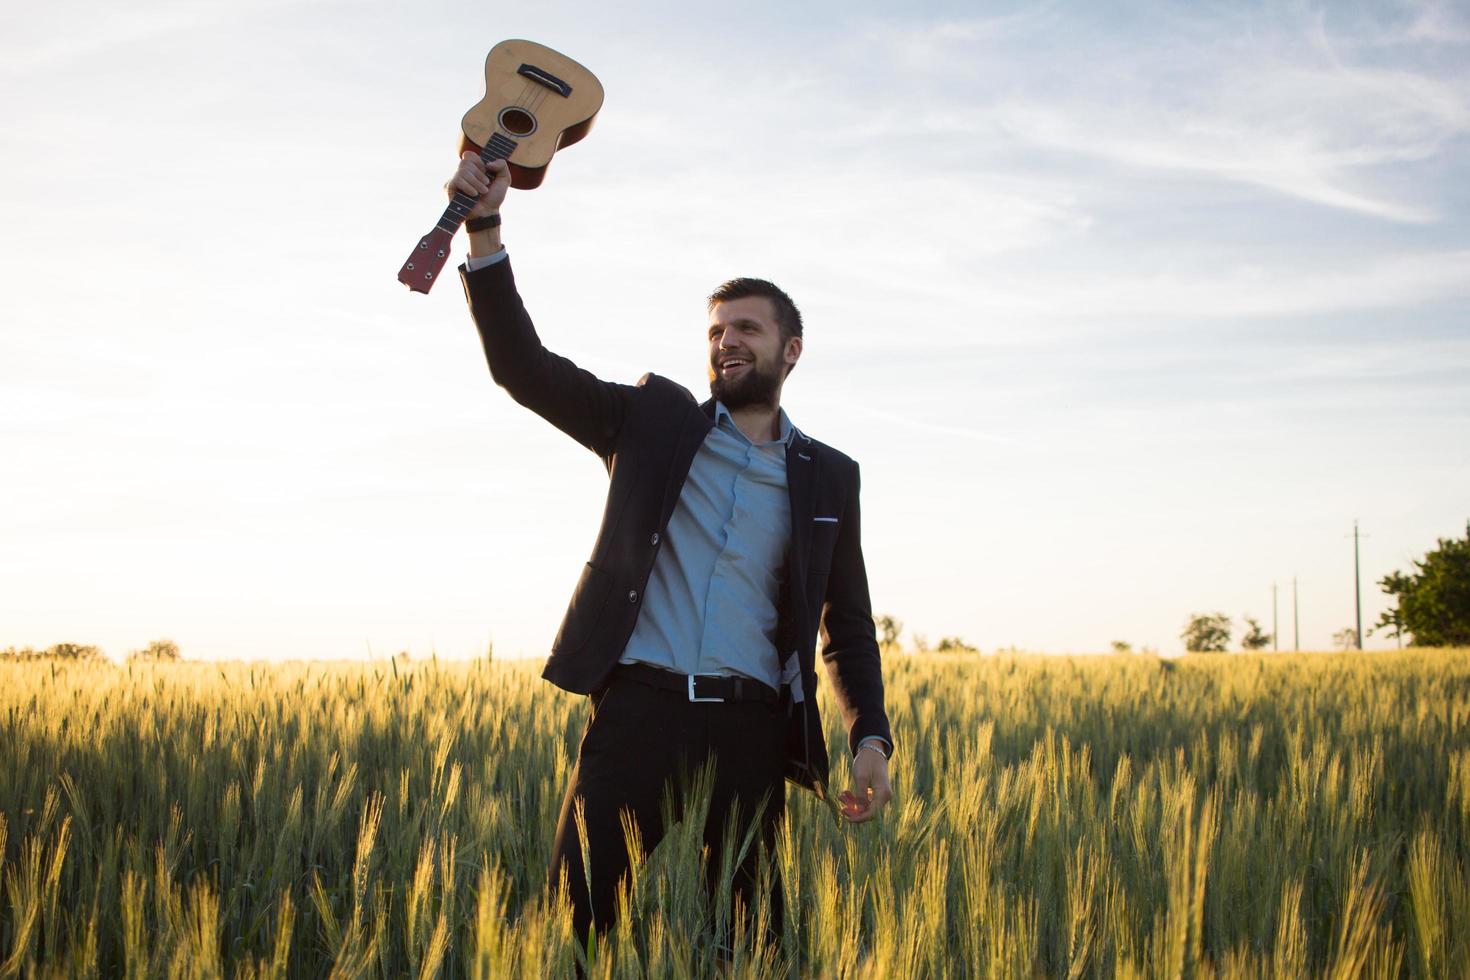 Happy manager with ukulele travel in summer wheat fields, buisinesman in suit play on ukulele, vacation or travel concept photo